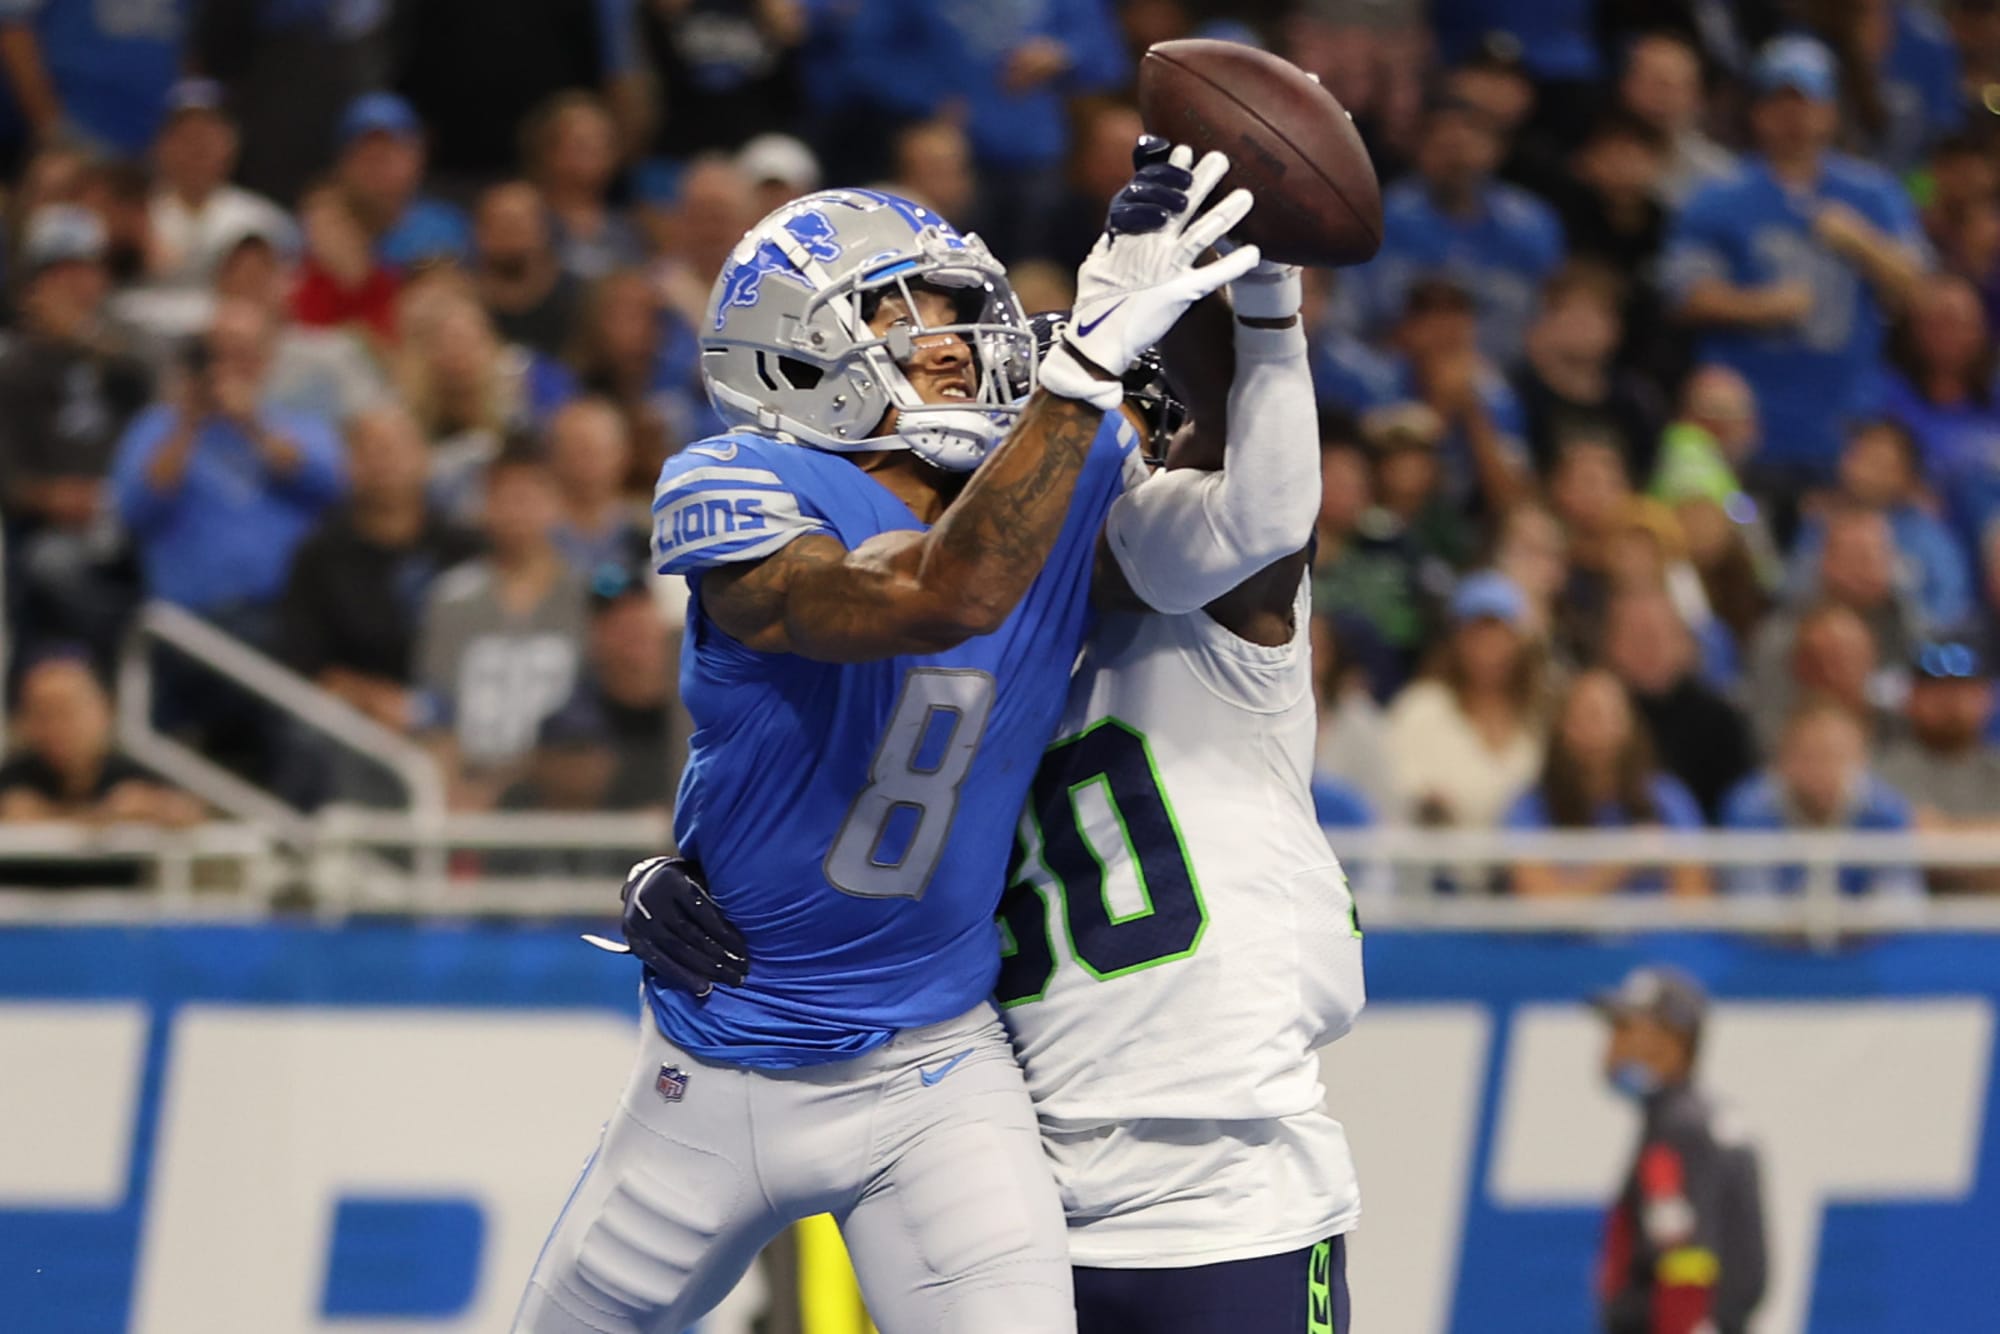 Lions wide receiver Josh Reynolds is worth a long look for Week 5